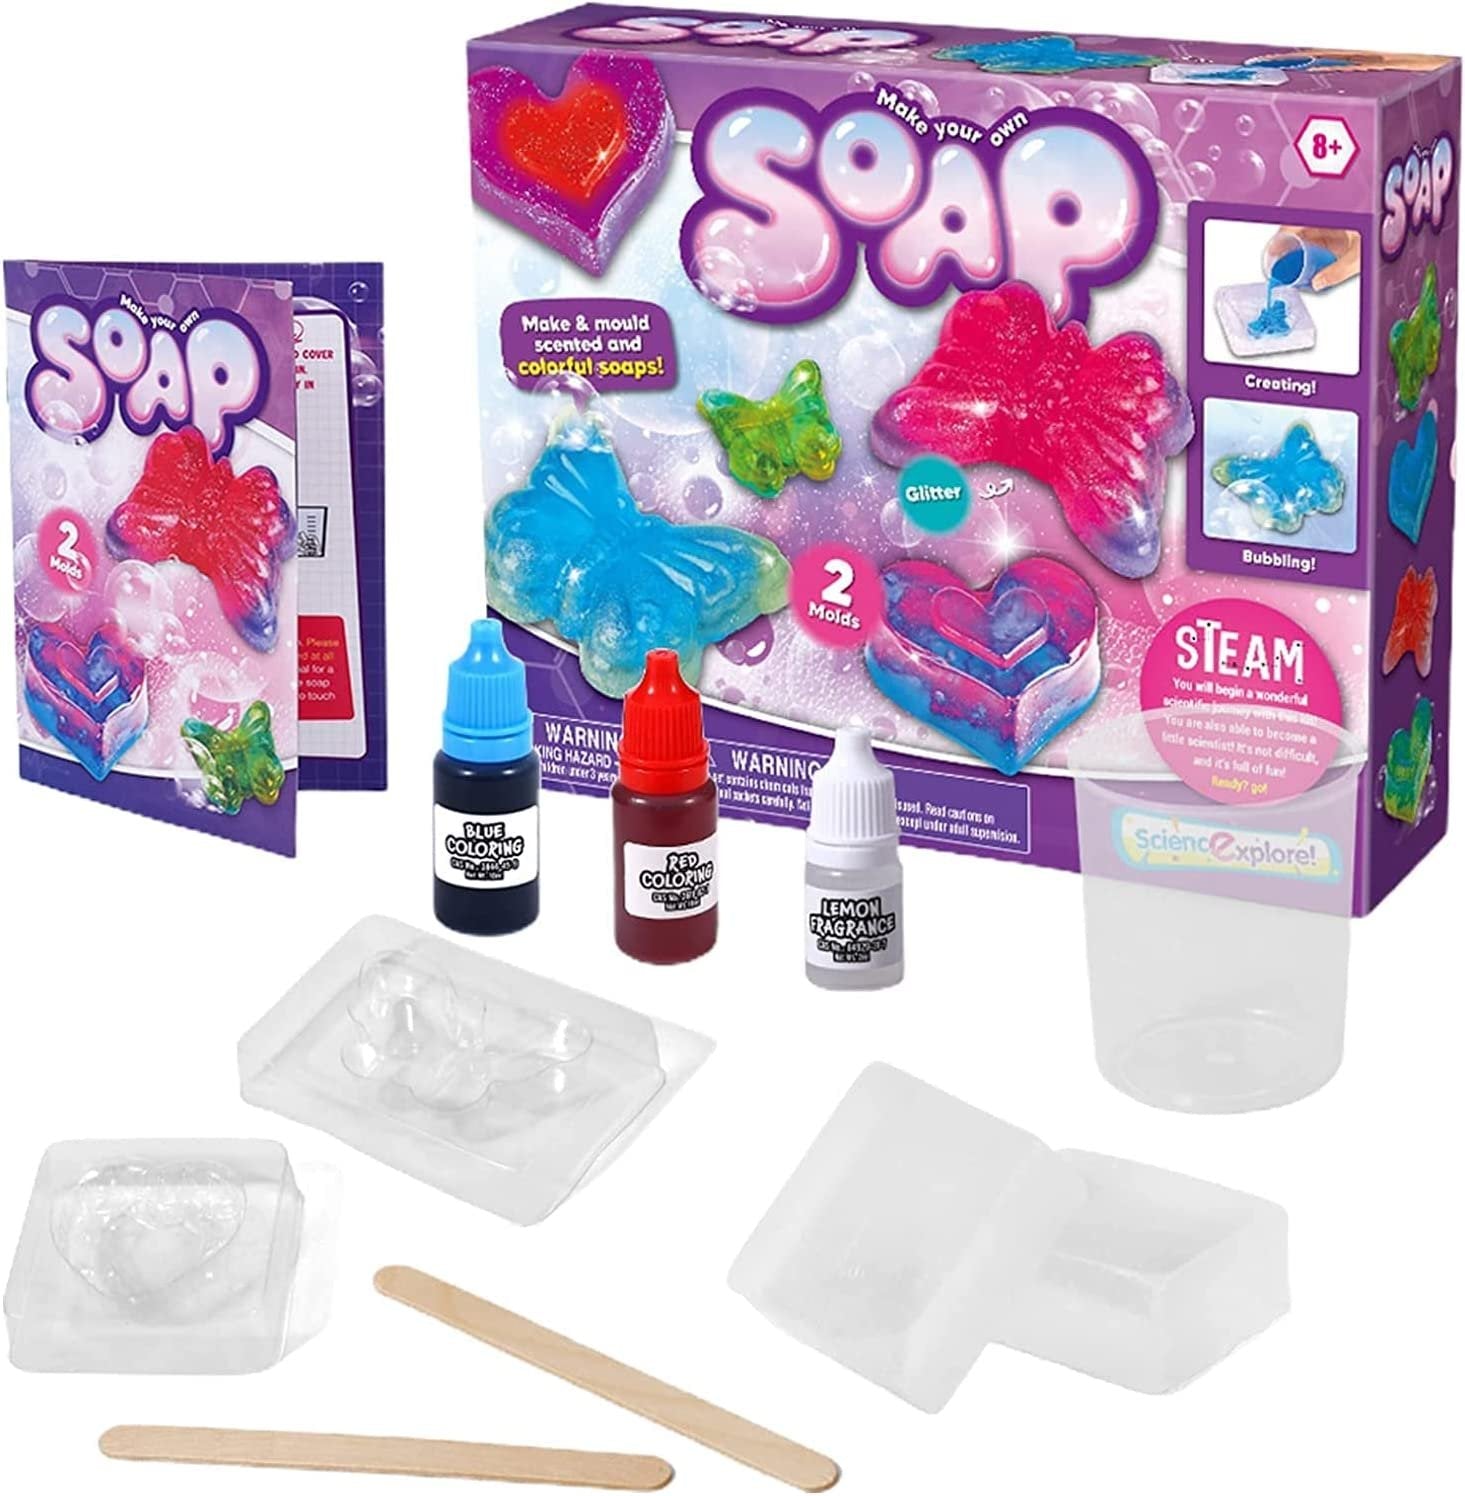 Soap Making Kit for Kids, DIY Science Lab Kit, Make Your Own Soap Kit, Fun  Educational Project Crafts & Arts for Kids Girls and Boys Ages 8 9 10 11 12